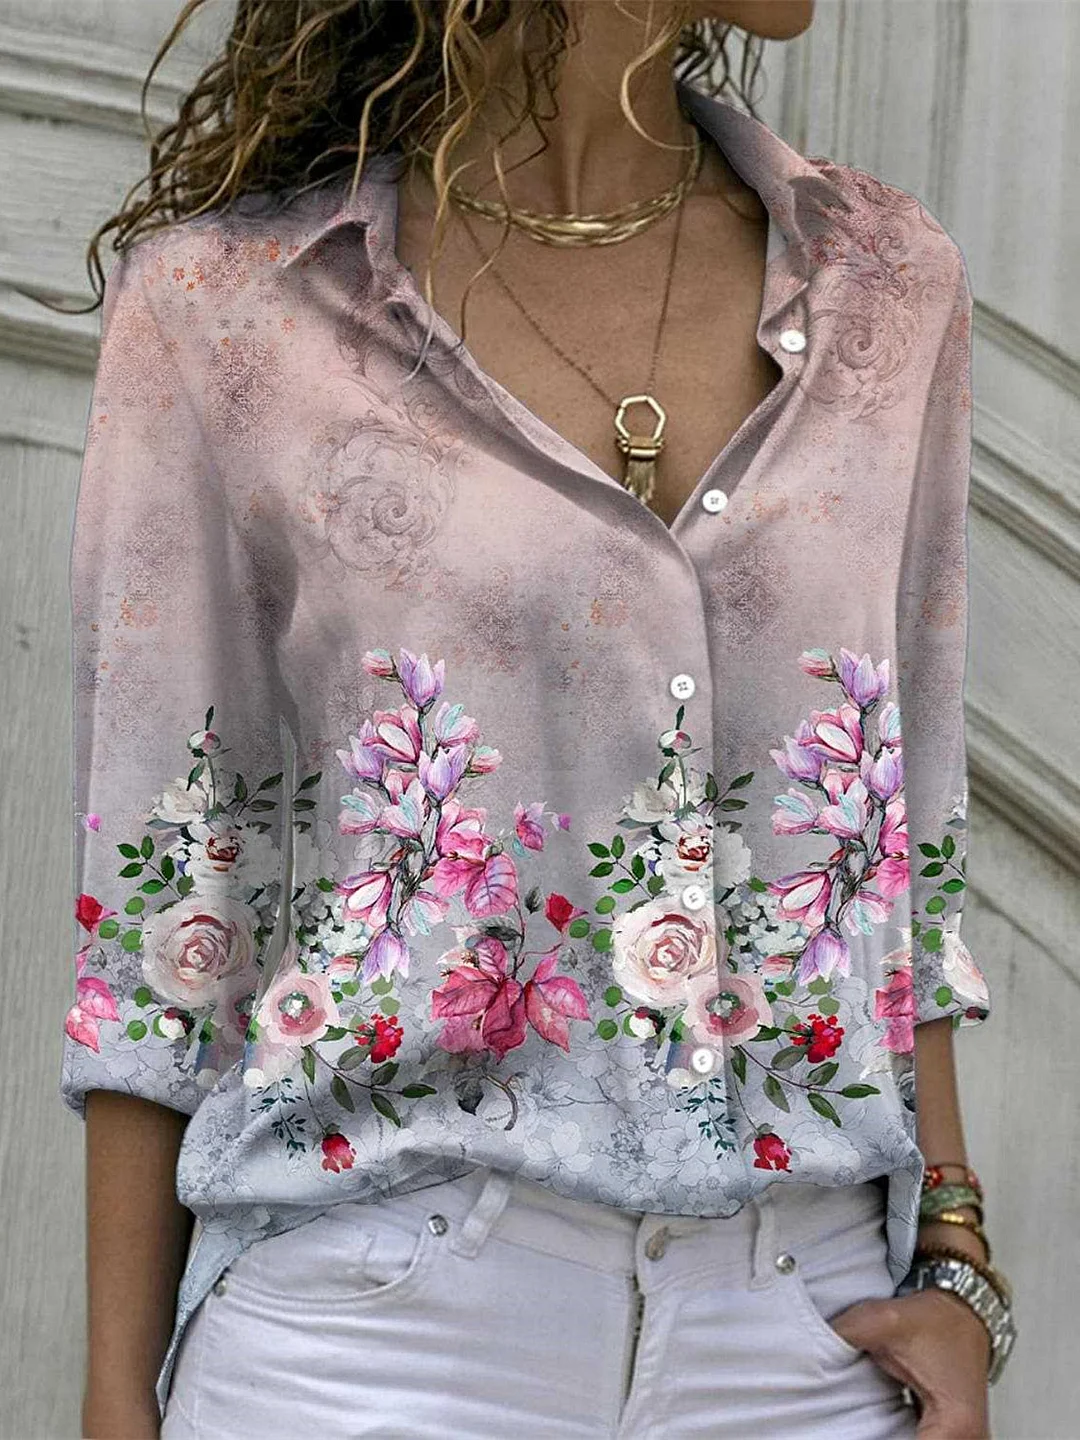 Women's Long Sleeve V-neck Floral Printed Top